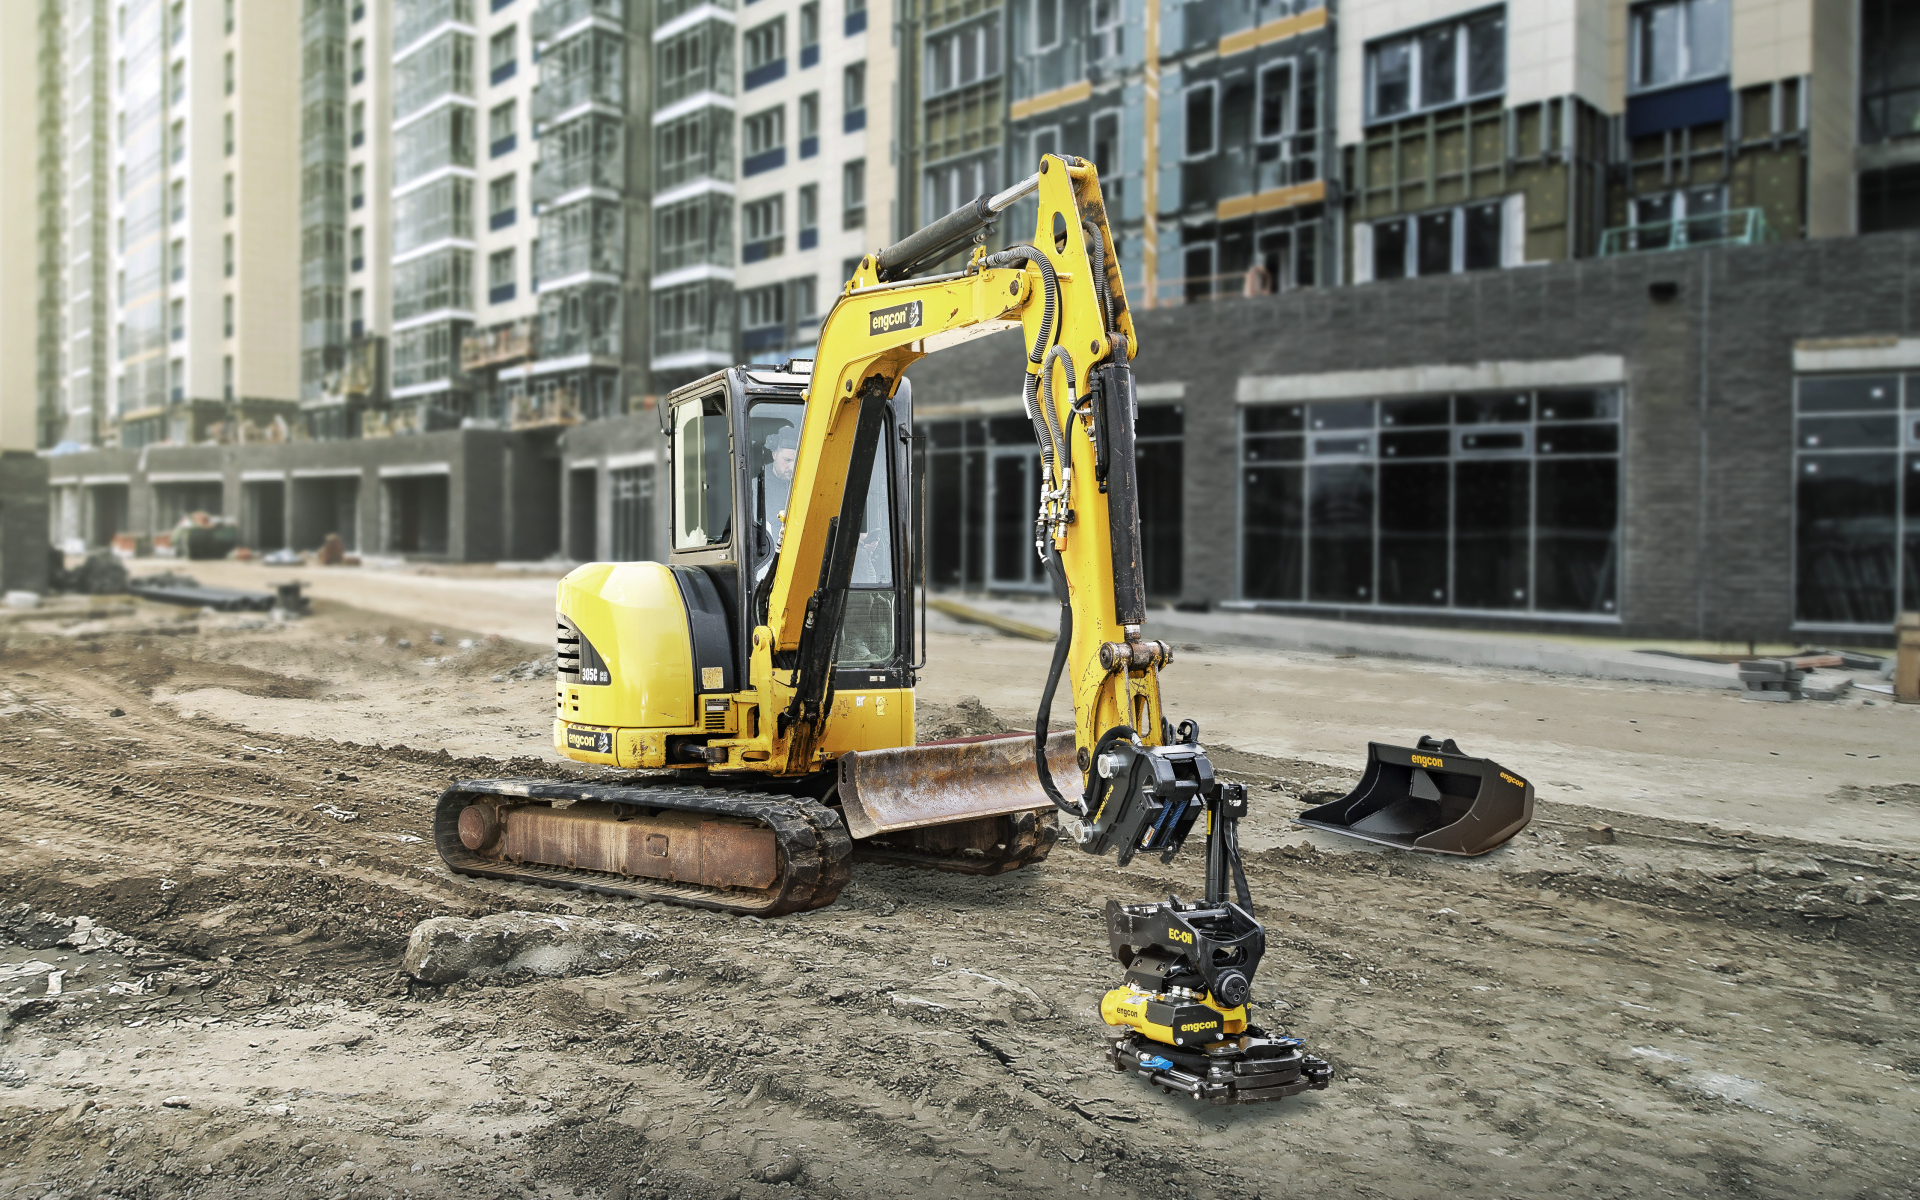 A safe and automatic machine hitch now available for smaller excavators – Latest innovation from Engcon